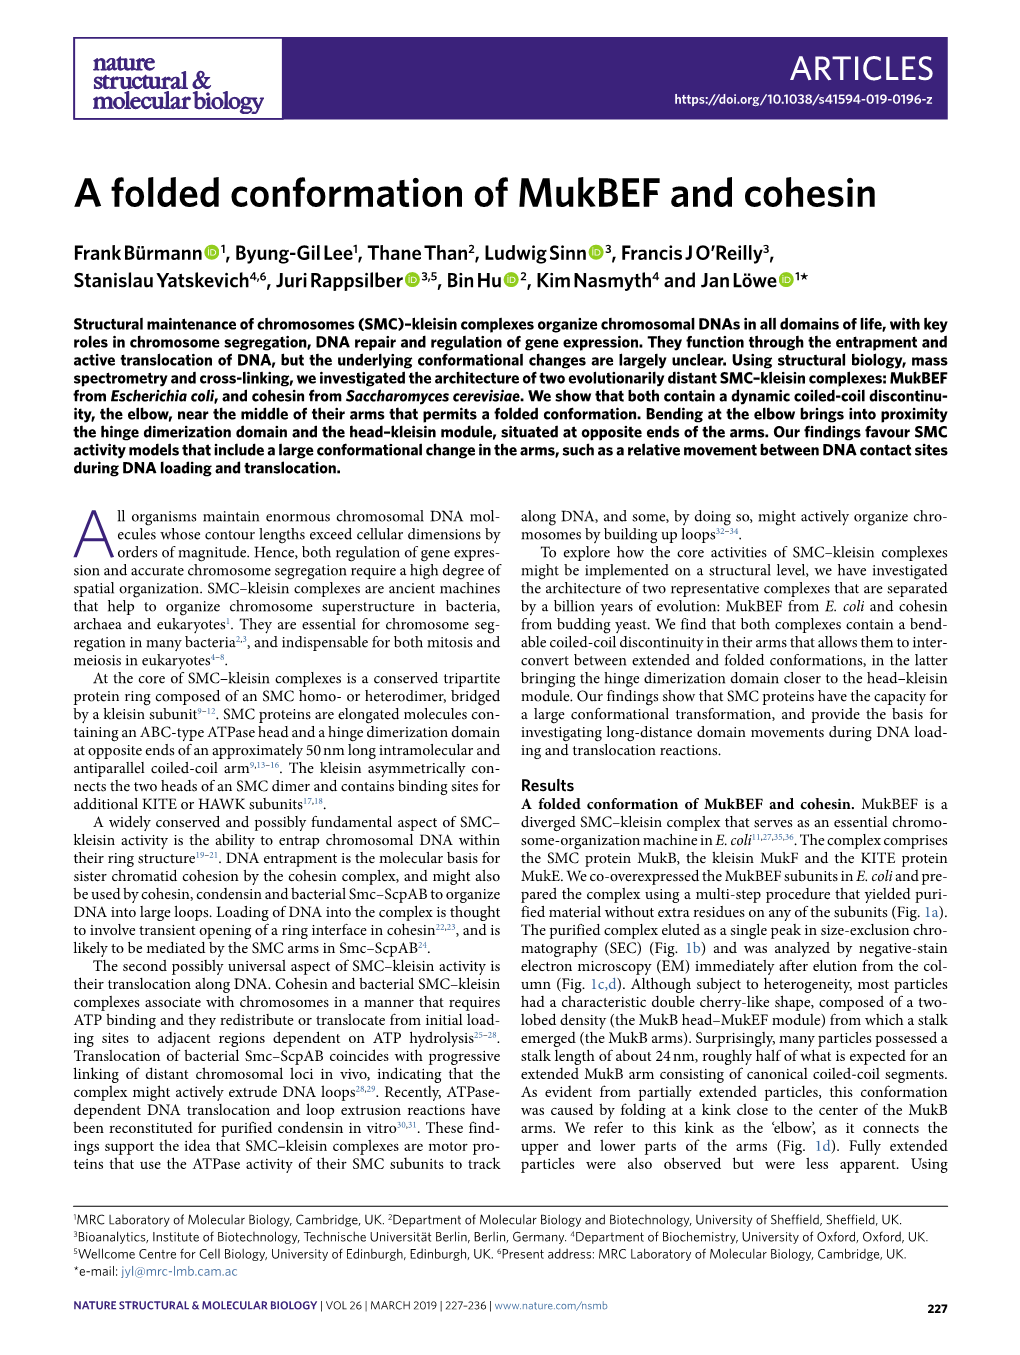 A Folded Conformation of Mukbef and Cohesin